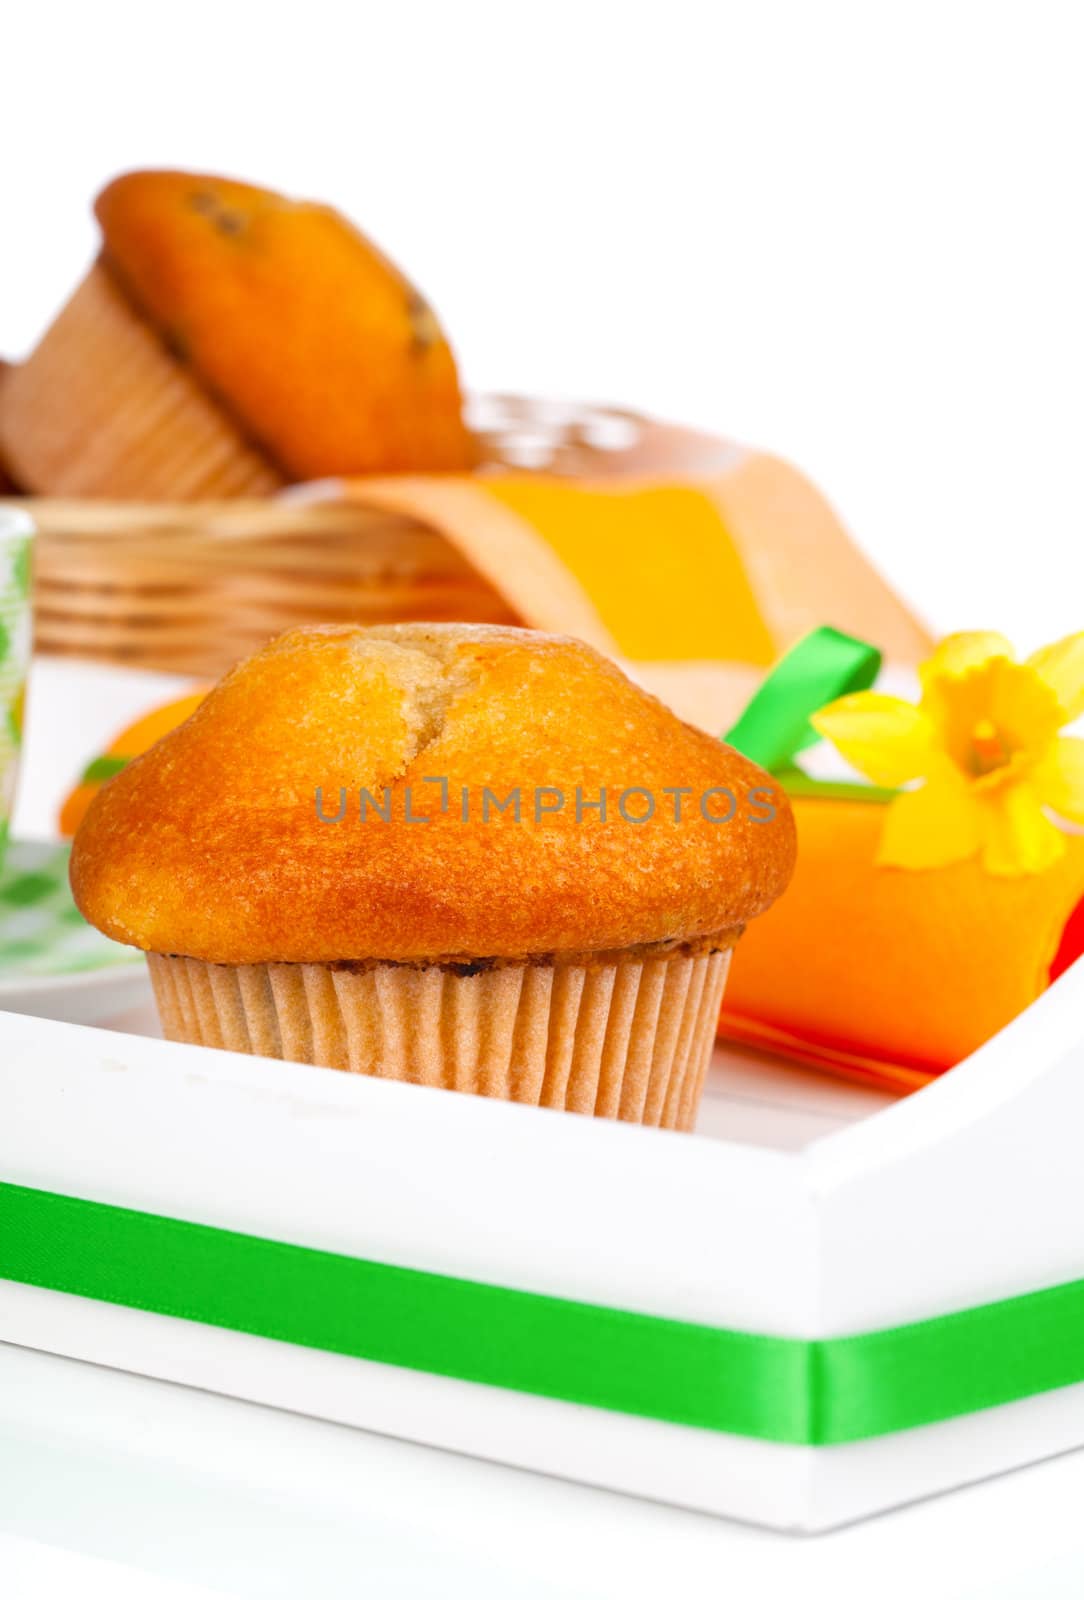 muffins in a tray for breakfast. isolated on white background.